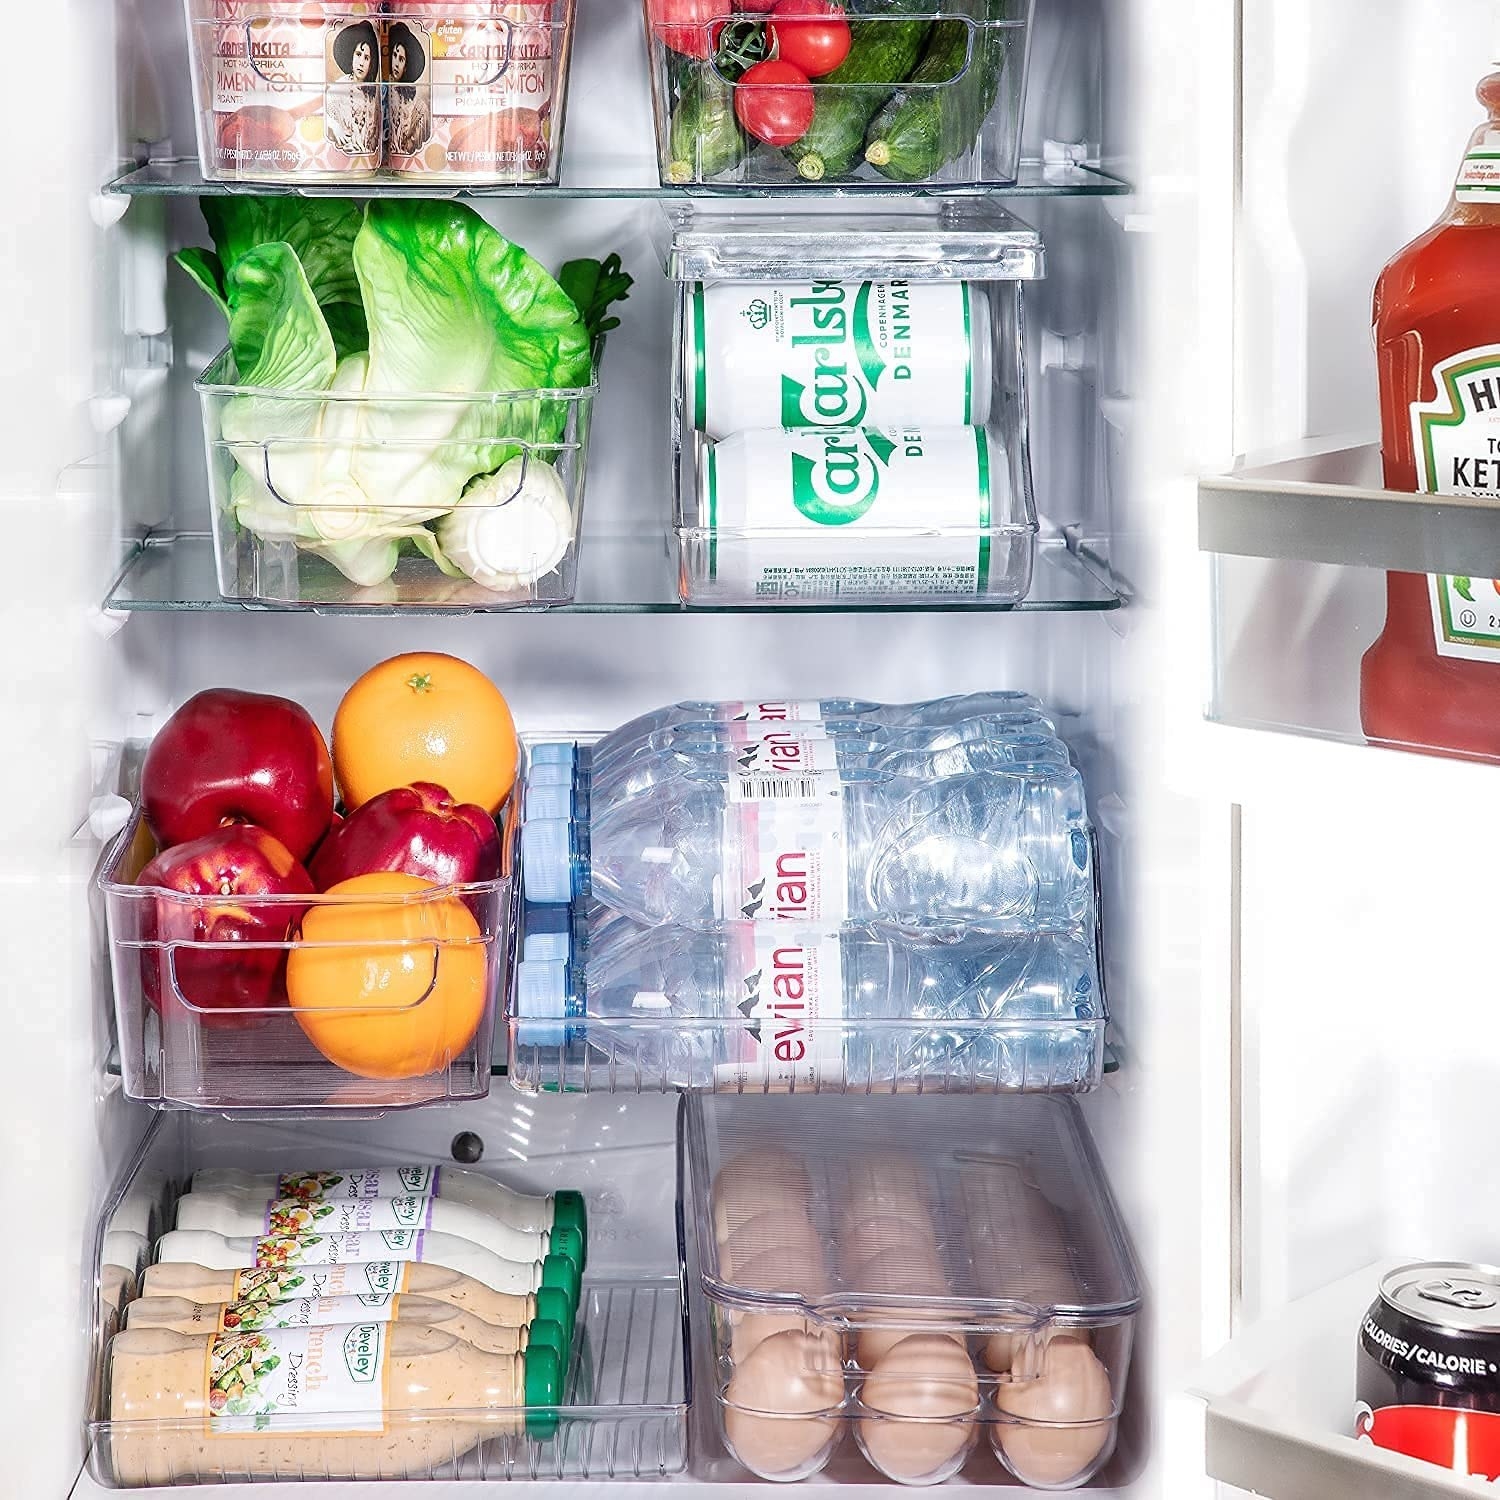 eggs, products, cans, bottles, and more divided into fridge organizers